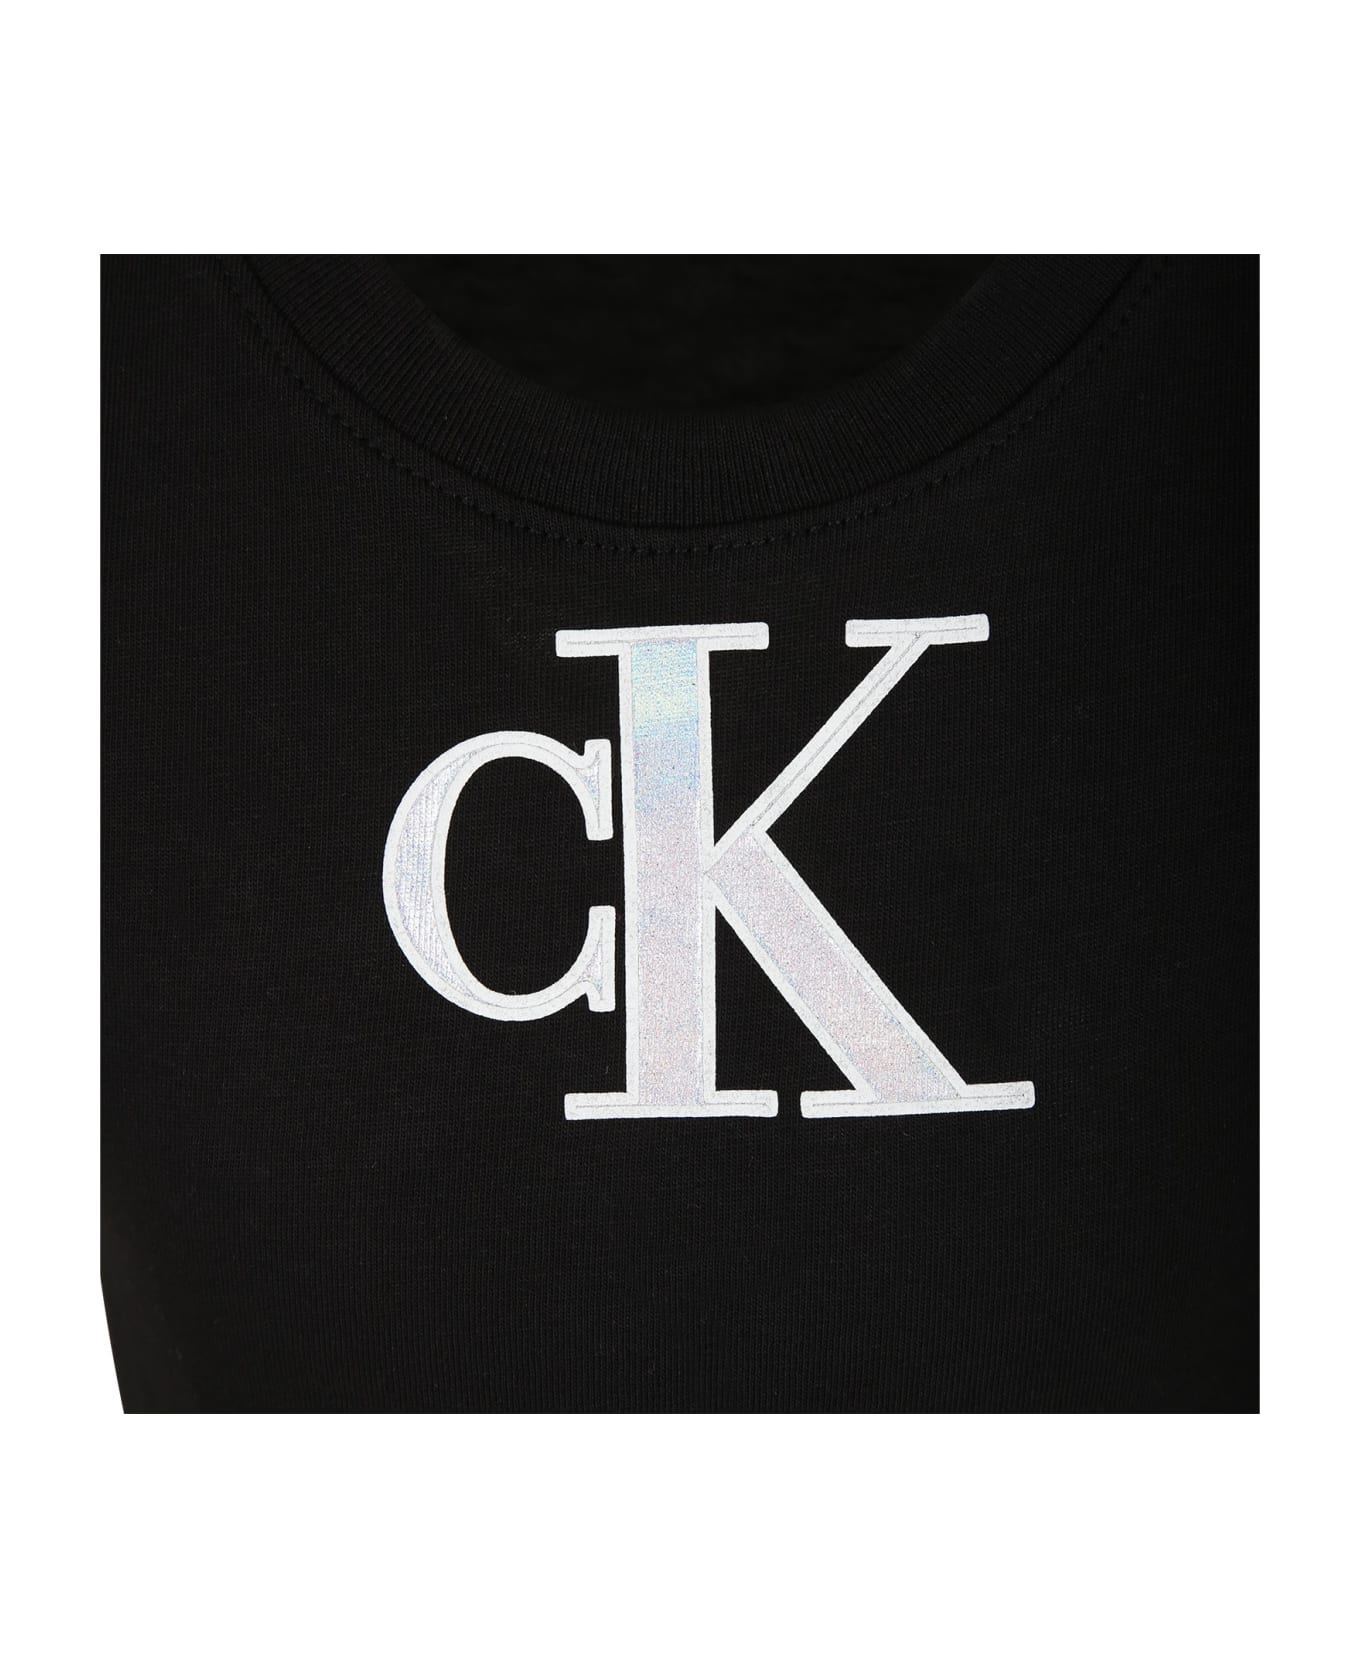 Calvin Klein Black T-shirt For Gilr With Logo - Black Tシャツ＆ポロシャツ